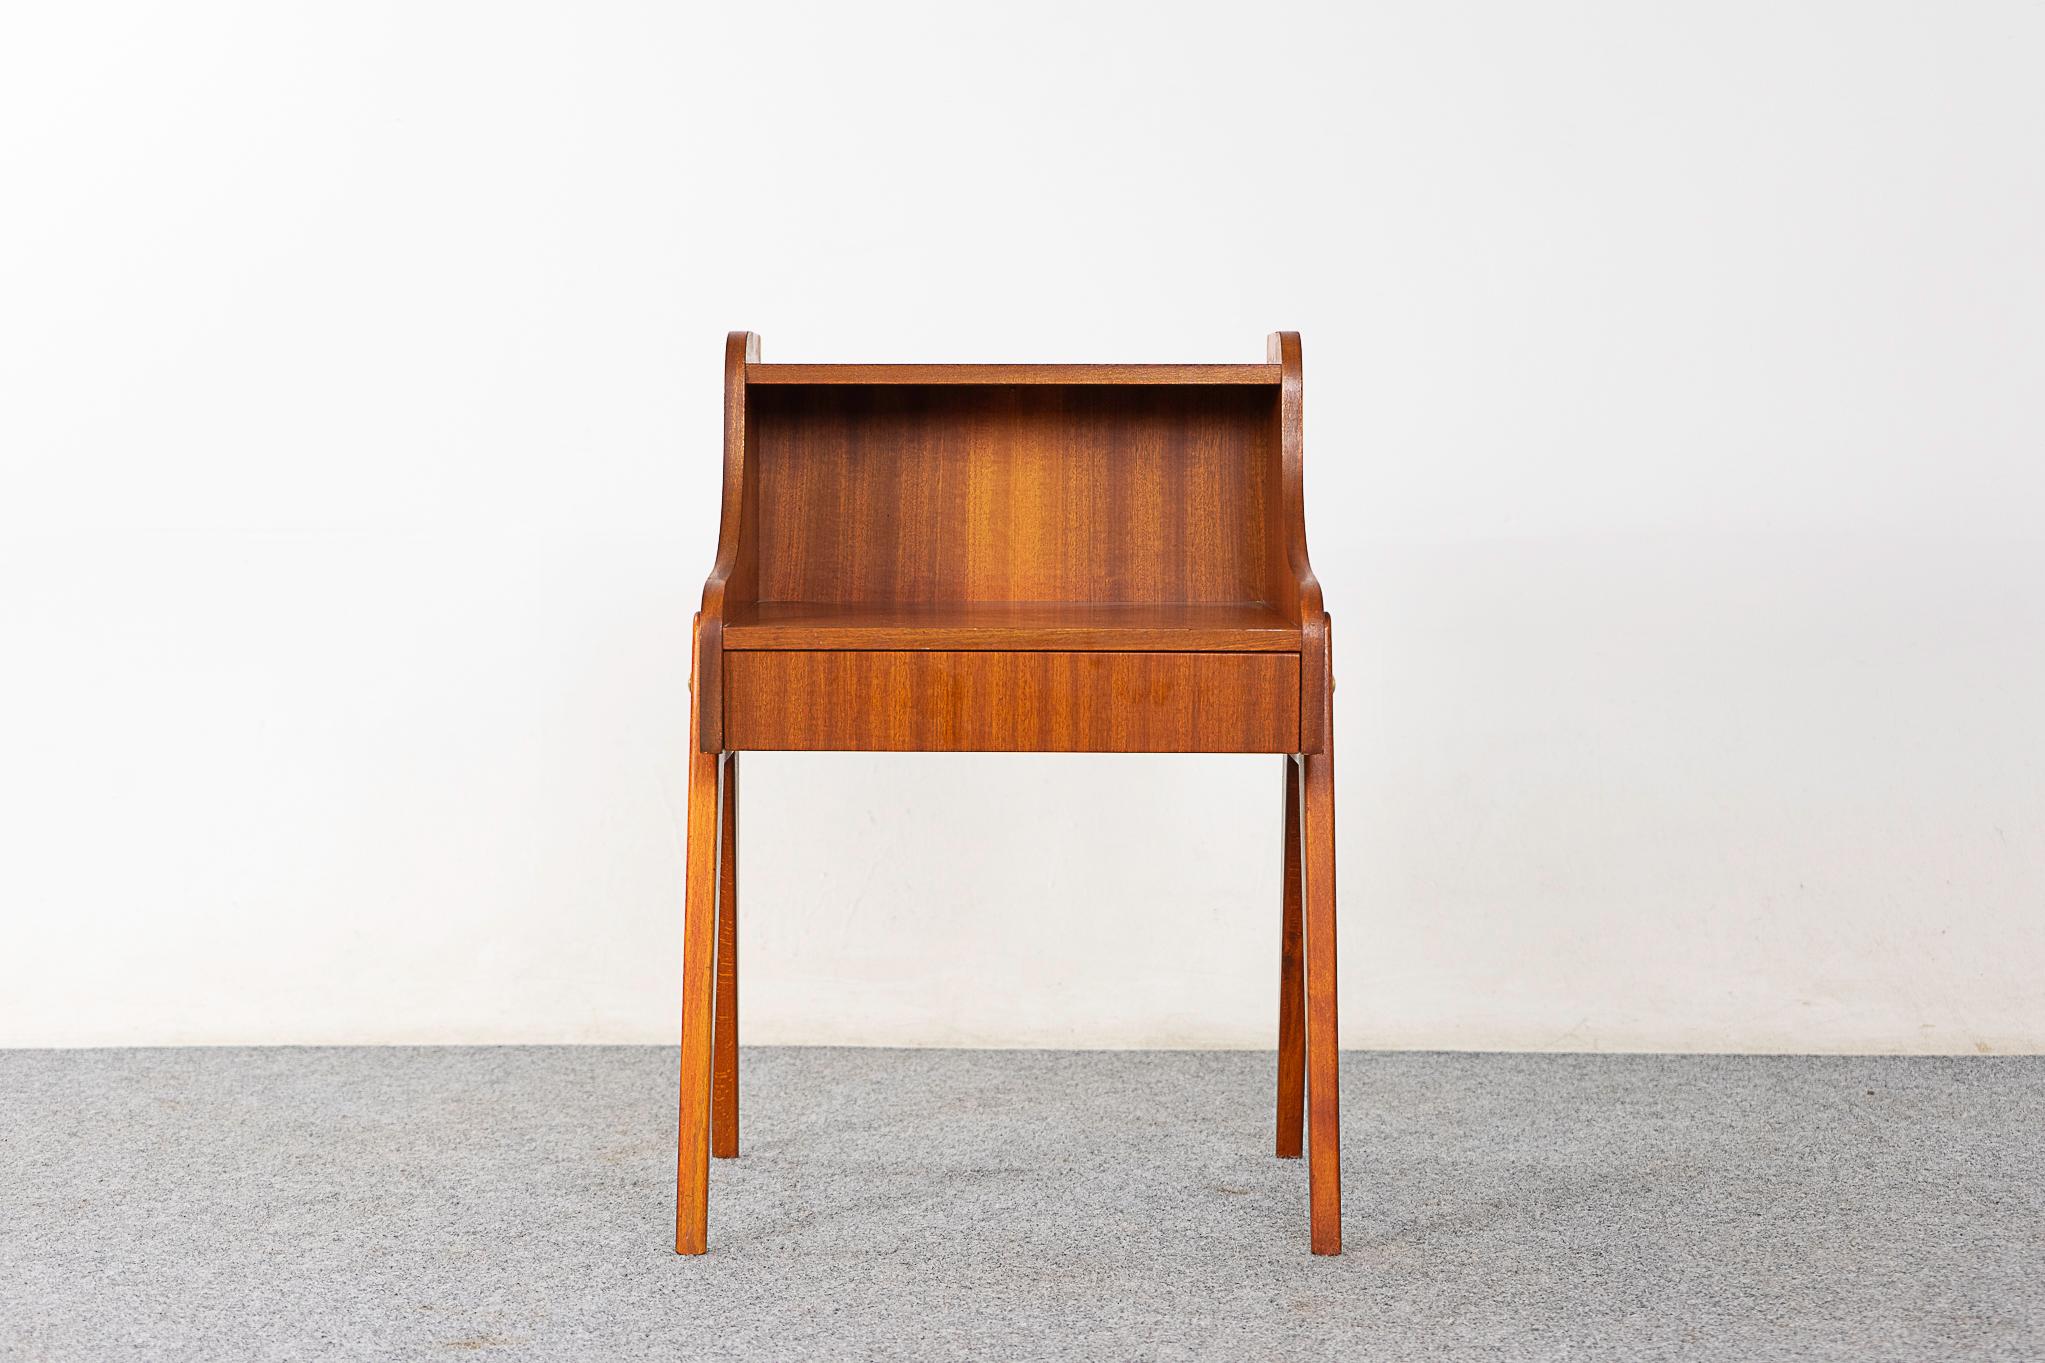 Mahogany mid-centruy bedside table, circa 1960's. Beautifully veneered with slender splayed legs and sleek drawer.

Unrestored item with option to purchase in restored condition for an additional $150 USD. Restoration includes: repairs, sanding,